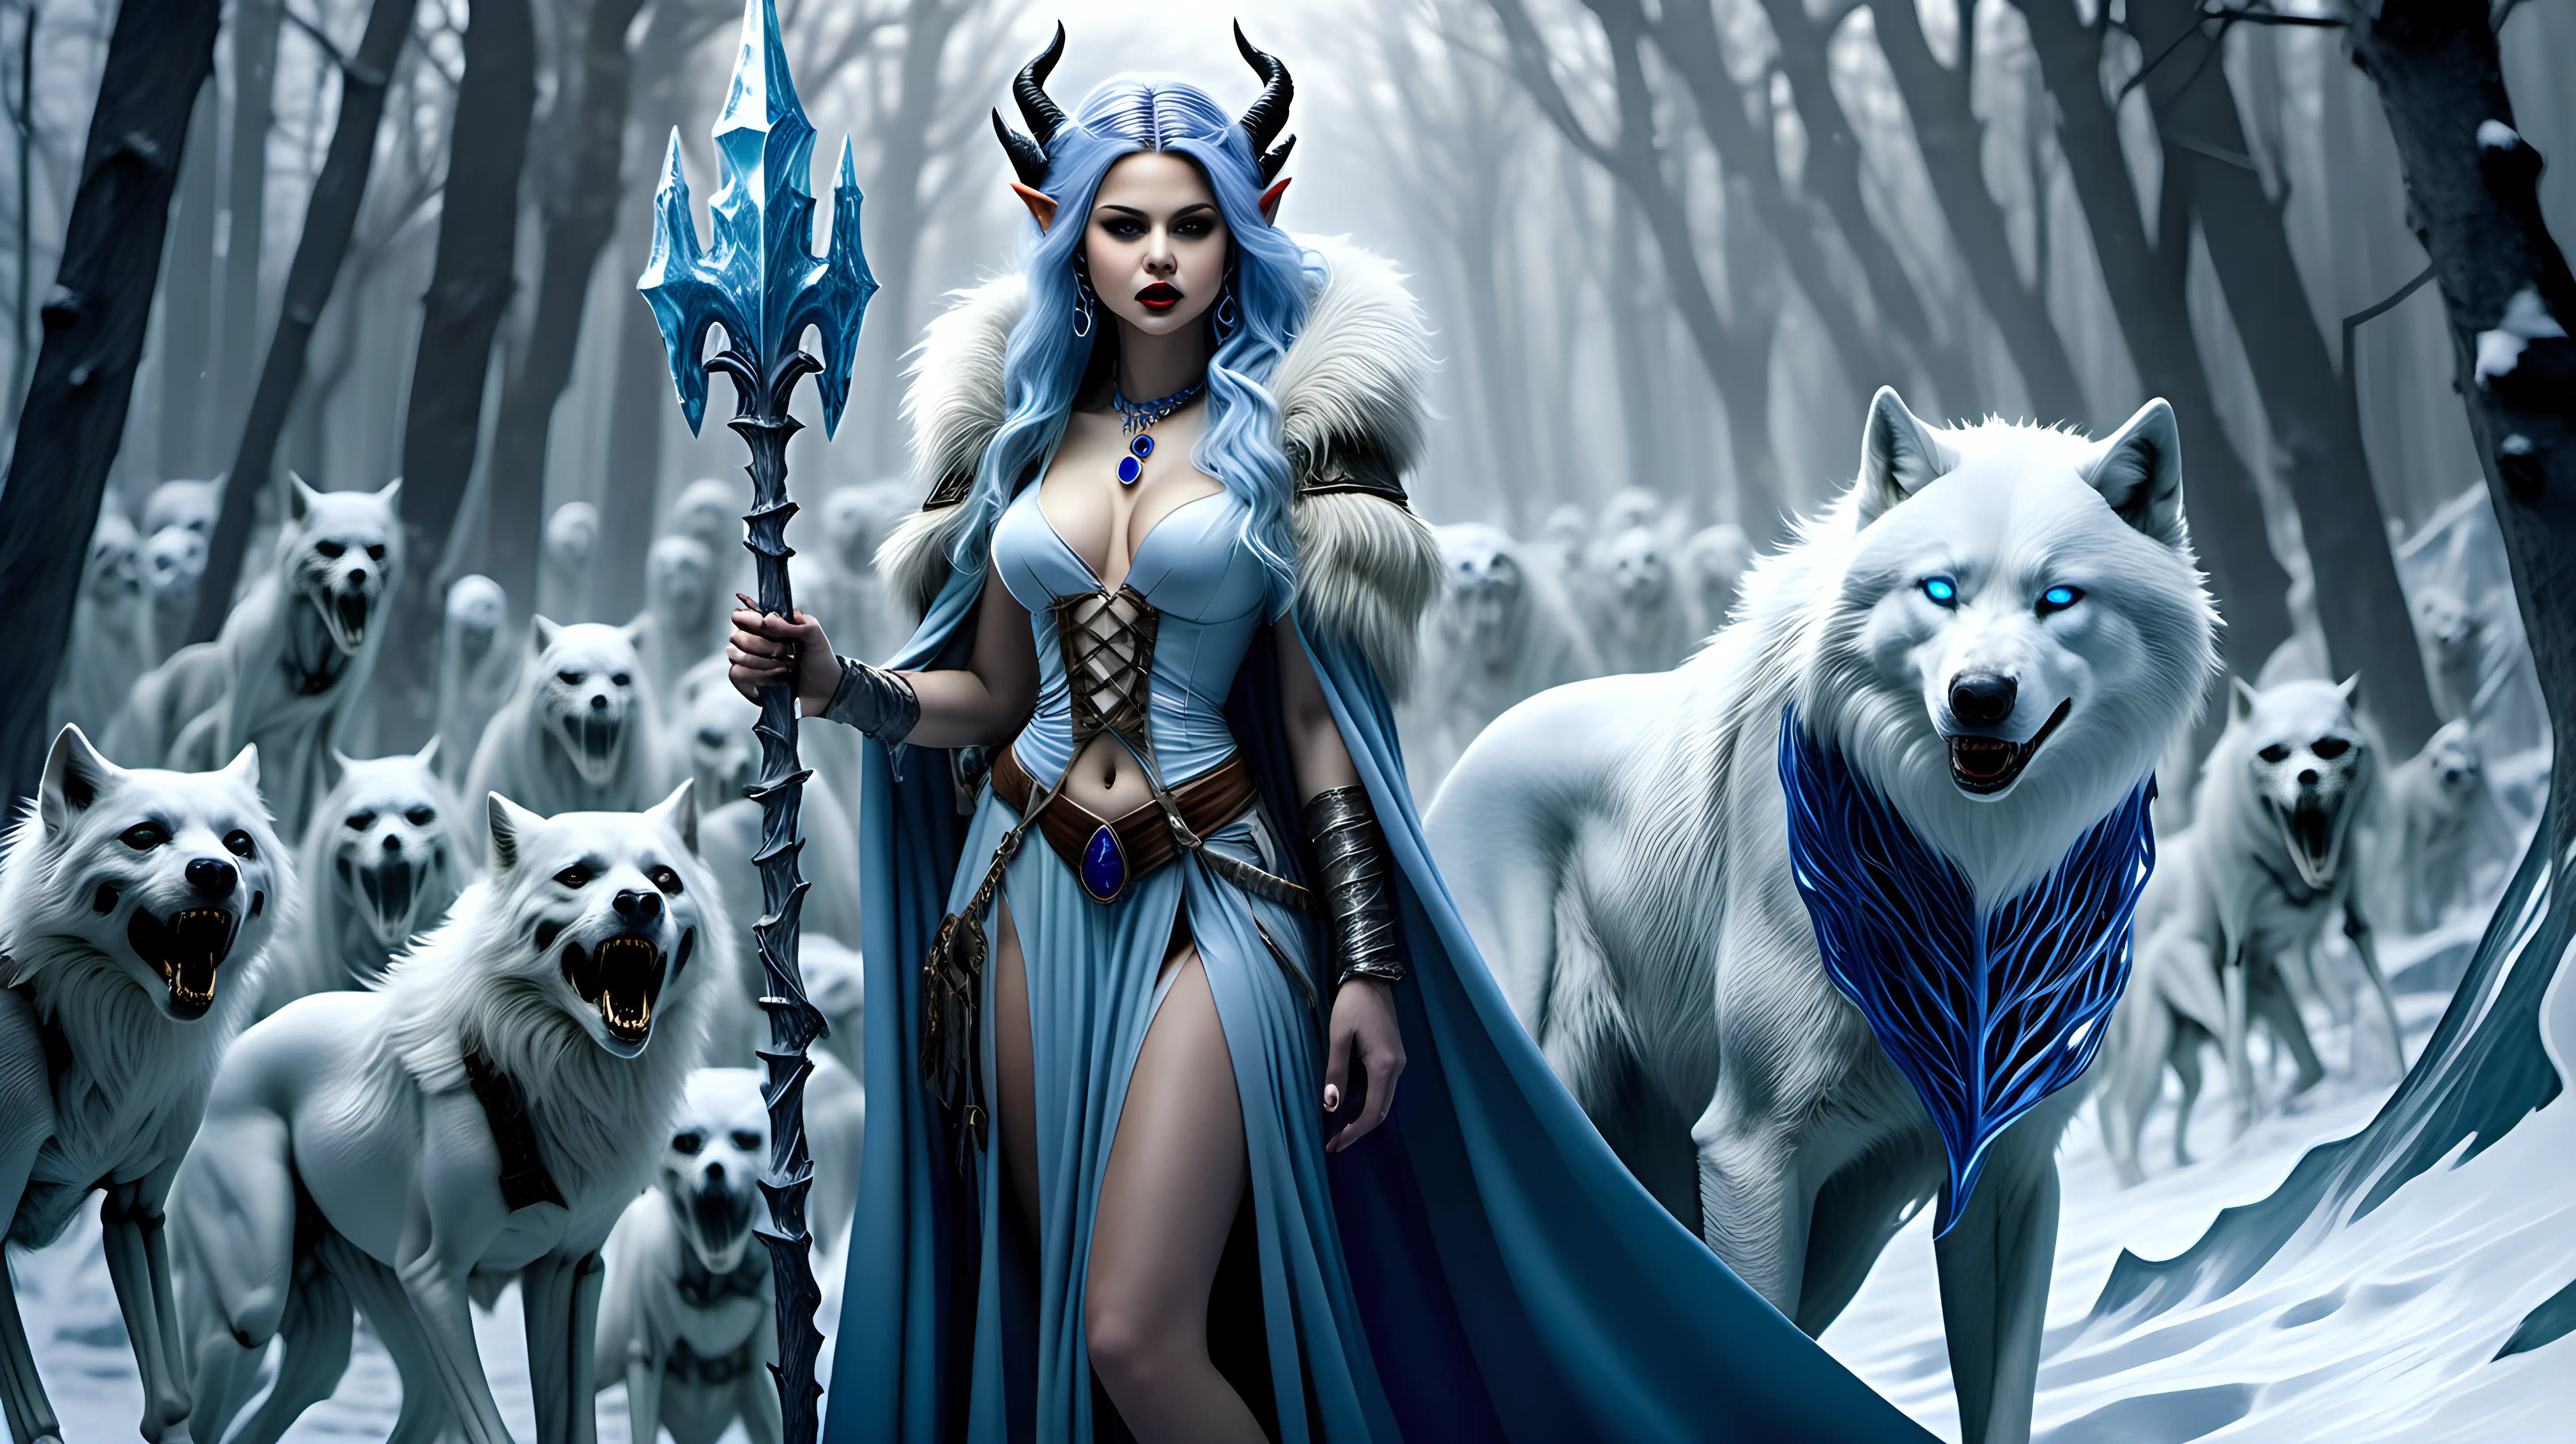 Beautiful voluptuous elf queen, snow white skin, pointy elf ears, long light blue windblown hair, small icicle horns, sapphire necklace, low-cut fur-lined clothes, looks like selena gomez, age 30 years, fantasy style, holding an icicle spear, standing next to a large white dire wolf, leading an army of skeleton warriors, ice palace background, wide angle view, zoomed out, photography